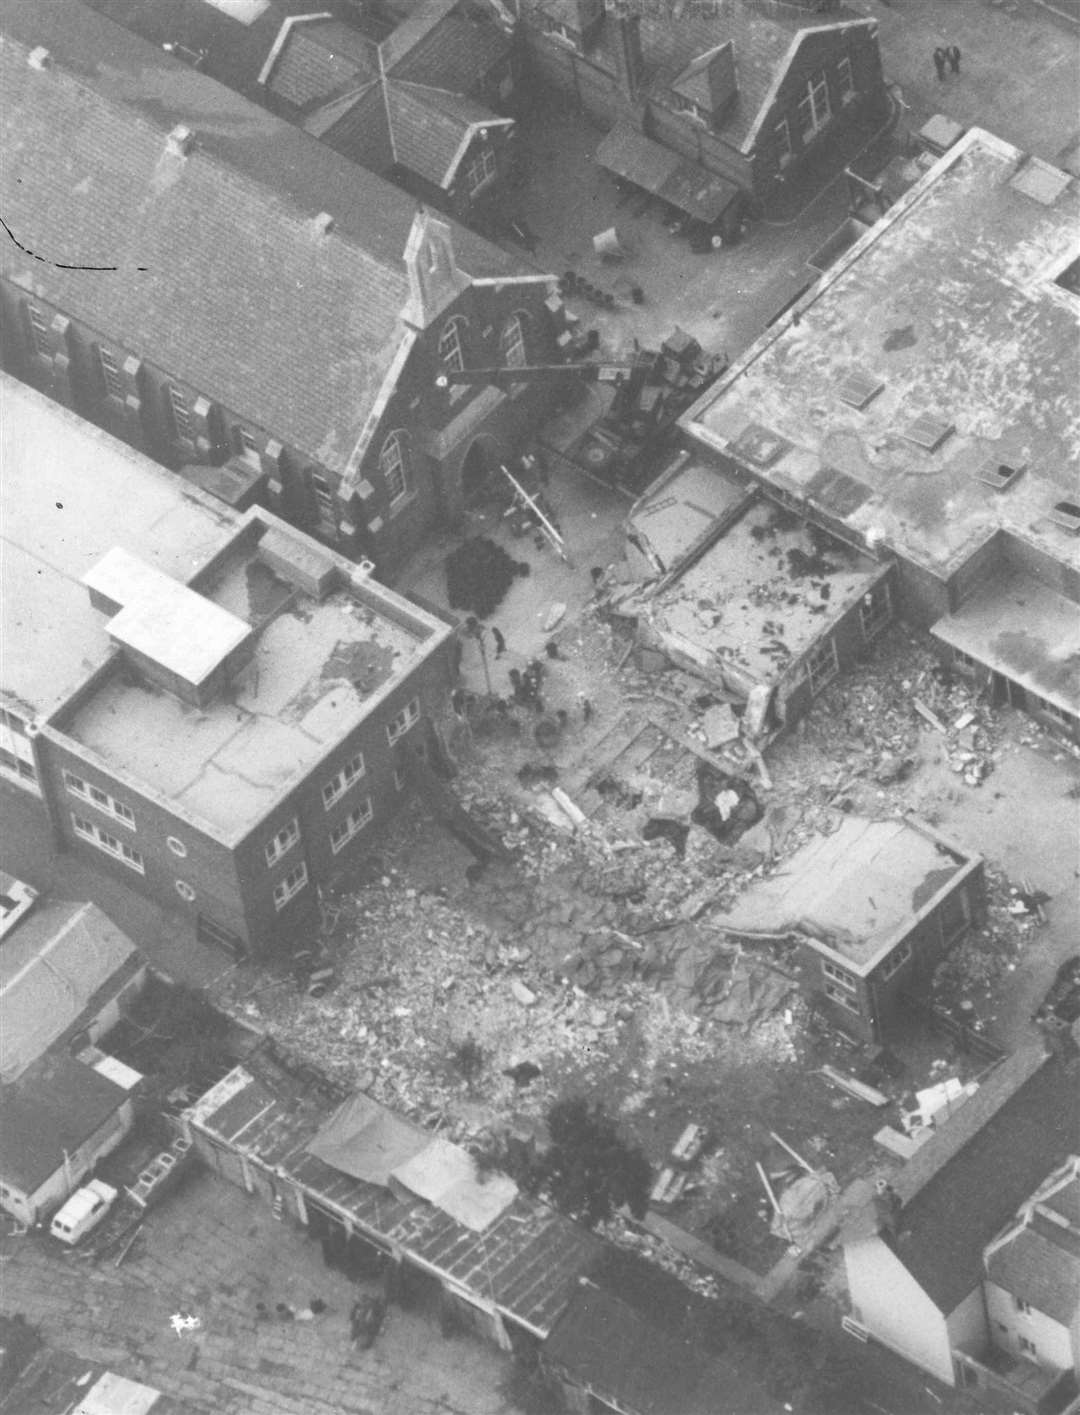 The Music School building in Deal destroyed by the bomb blast in September 1989